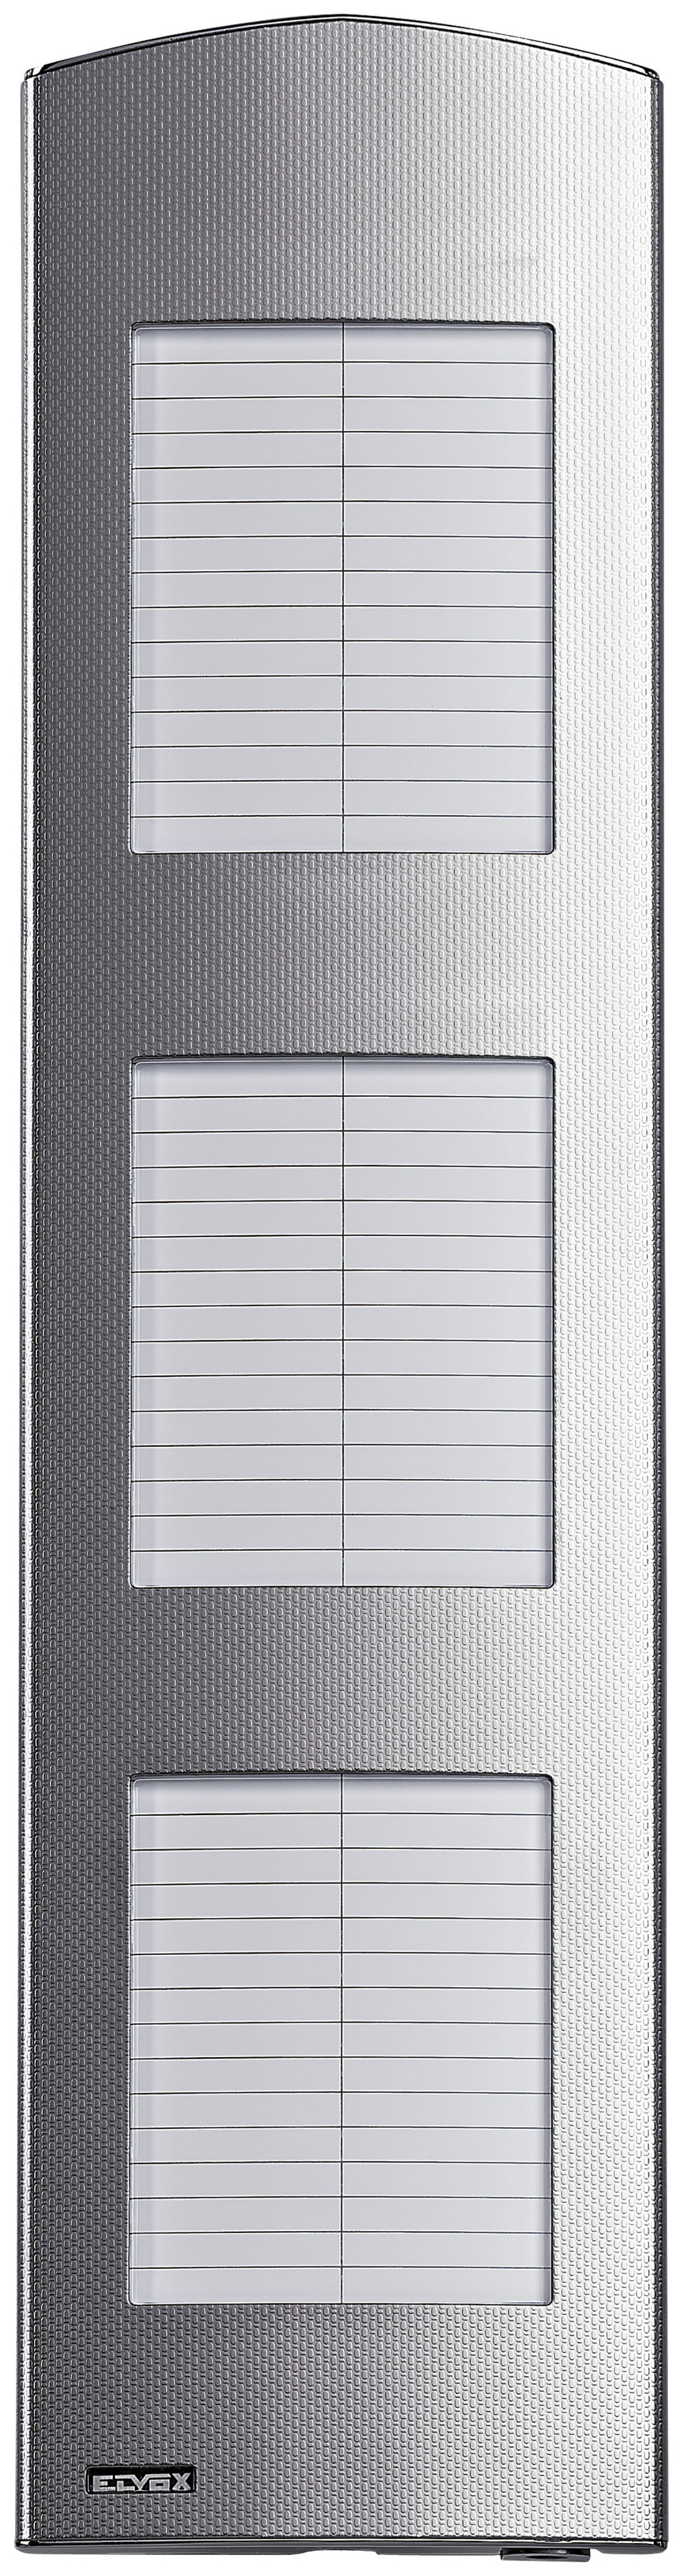 3-MODULE ADDITIONAL COVER PLATE WITH 3 CARDS FOR 15+15+15 NAMES W/ CARD LIGHTING STAINLESS STEEL